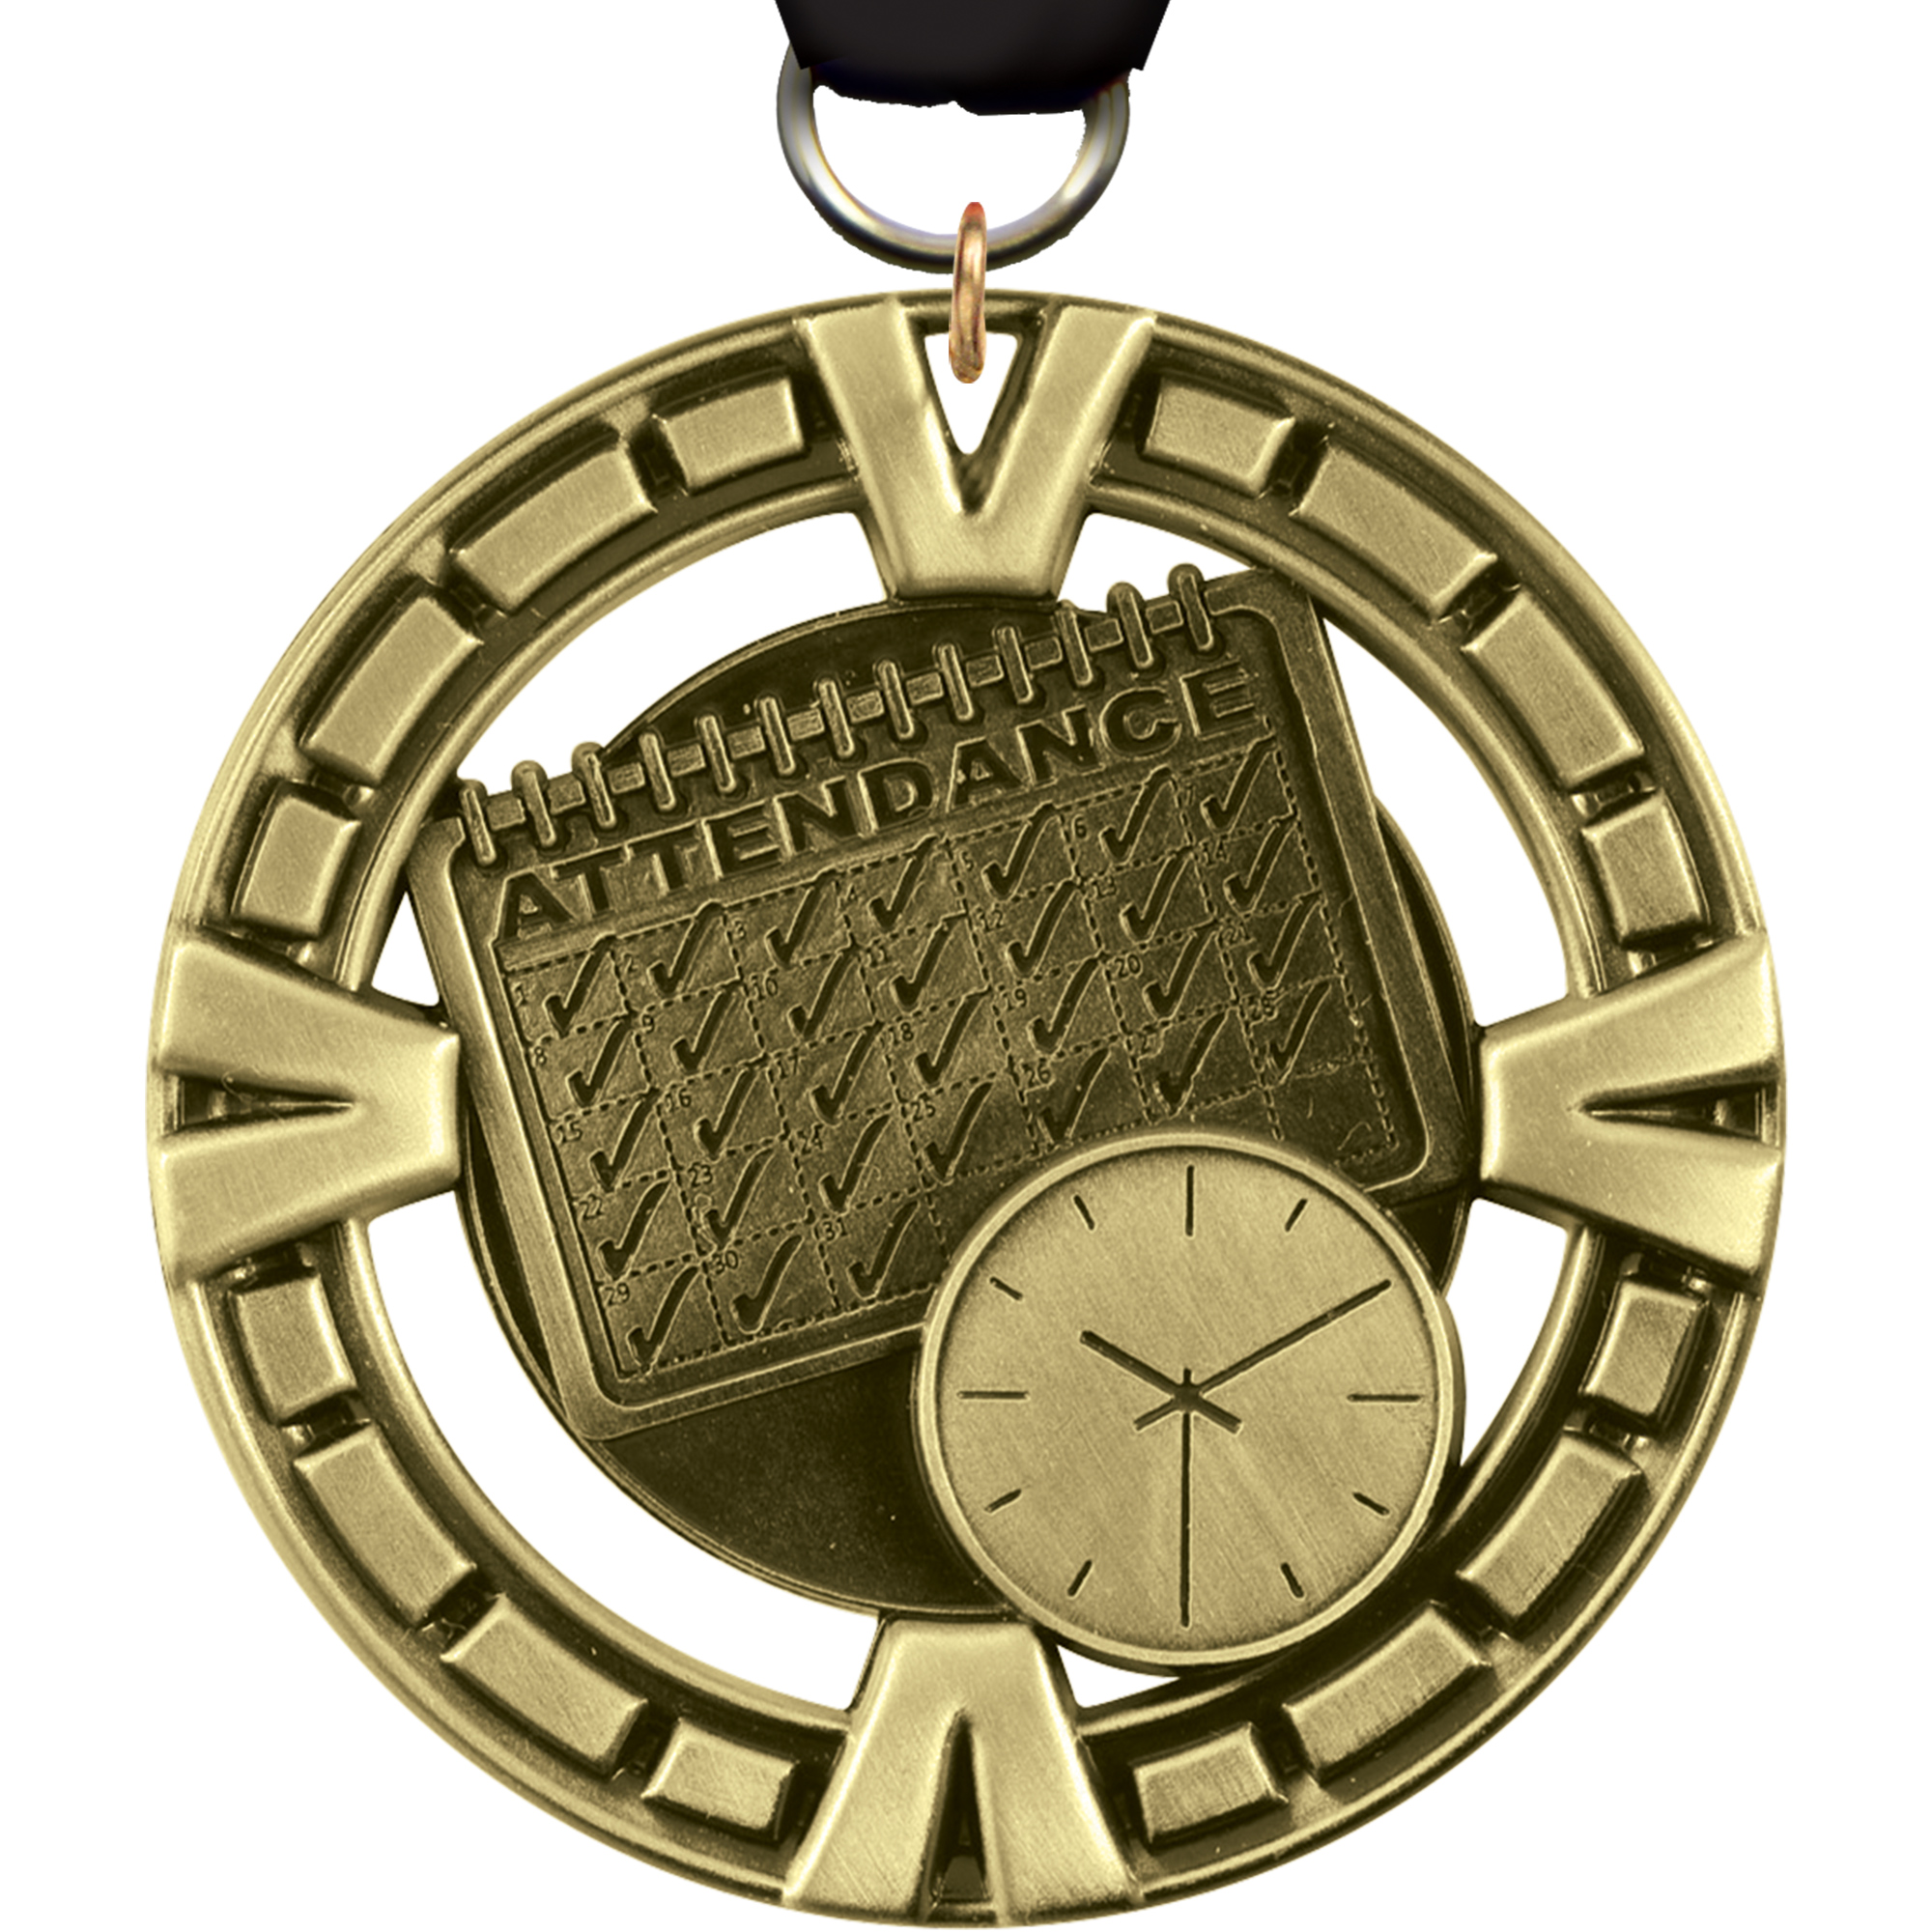 Attendance Victory Medal